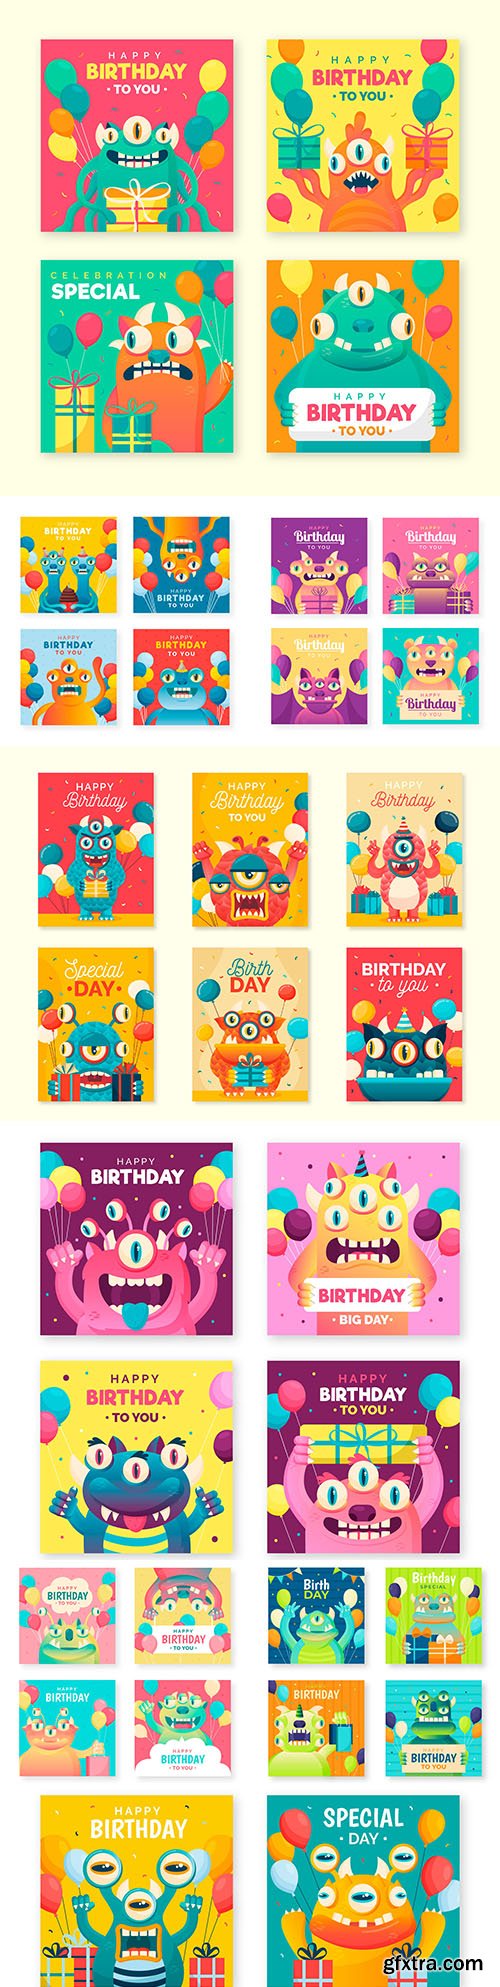 Birthday card for illustrations with funny monsters
